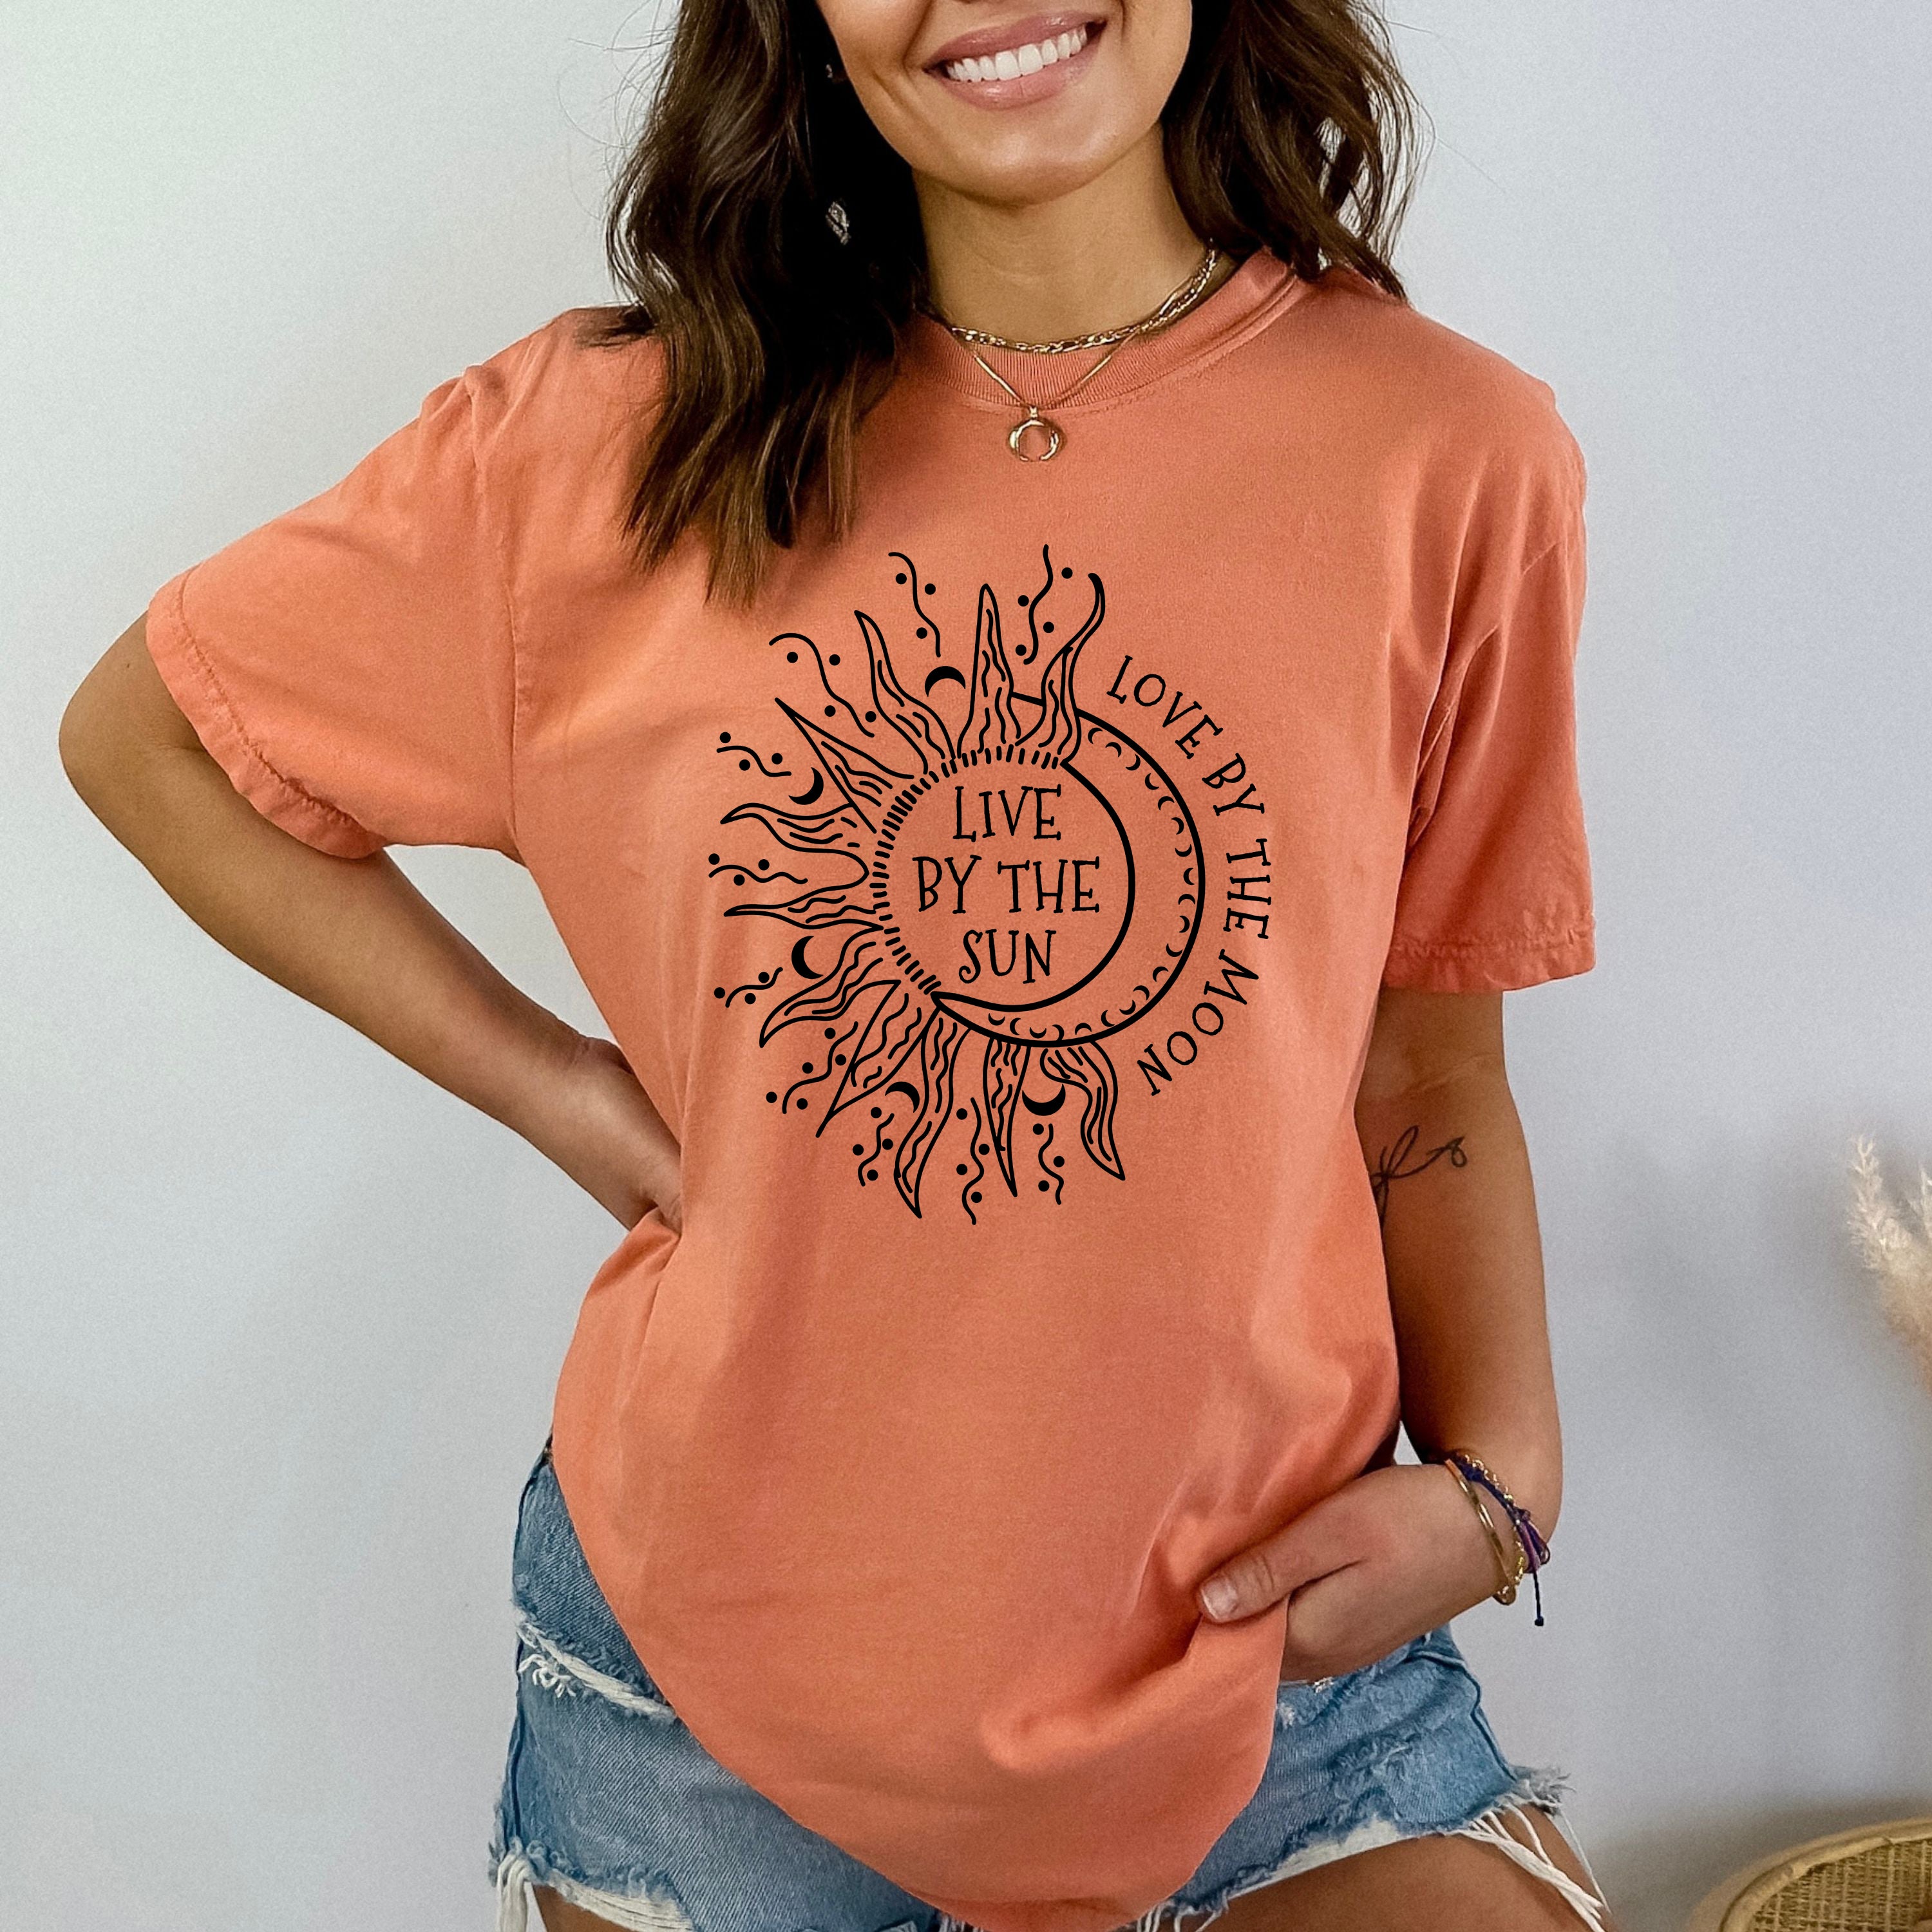 "LIVE BY THE SUN" BELLA CANVAS T-SHIRT